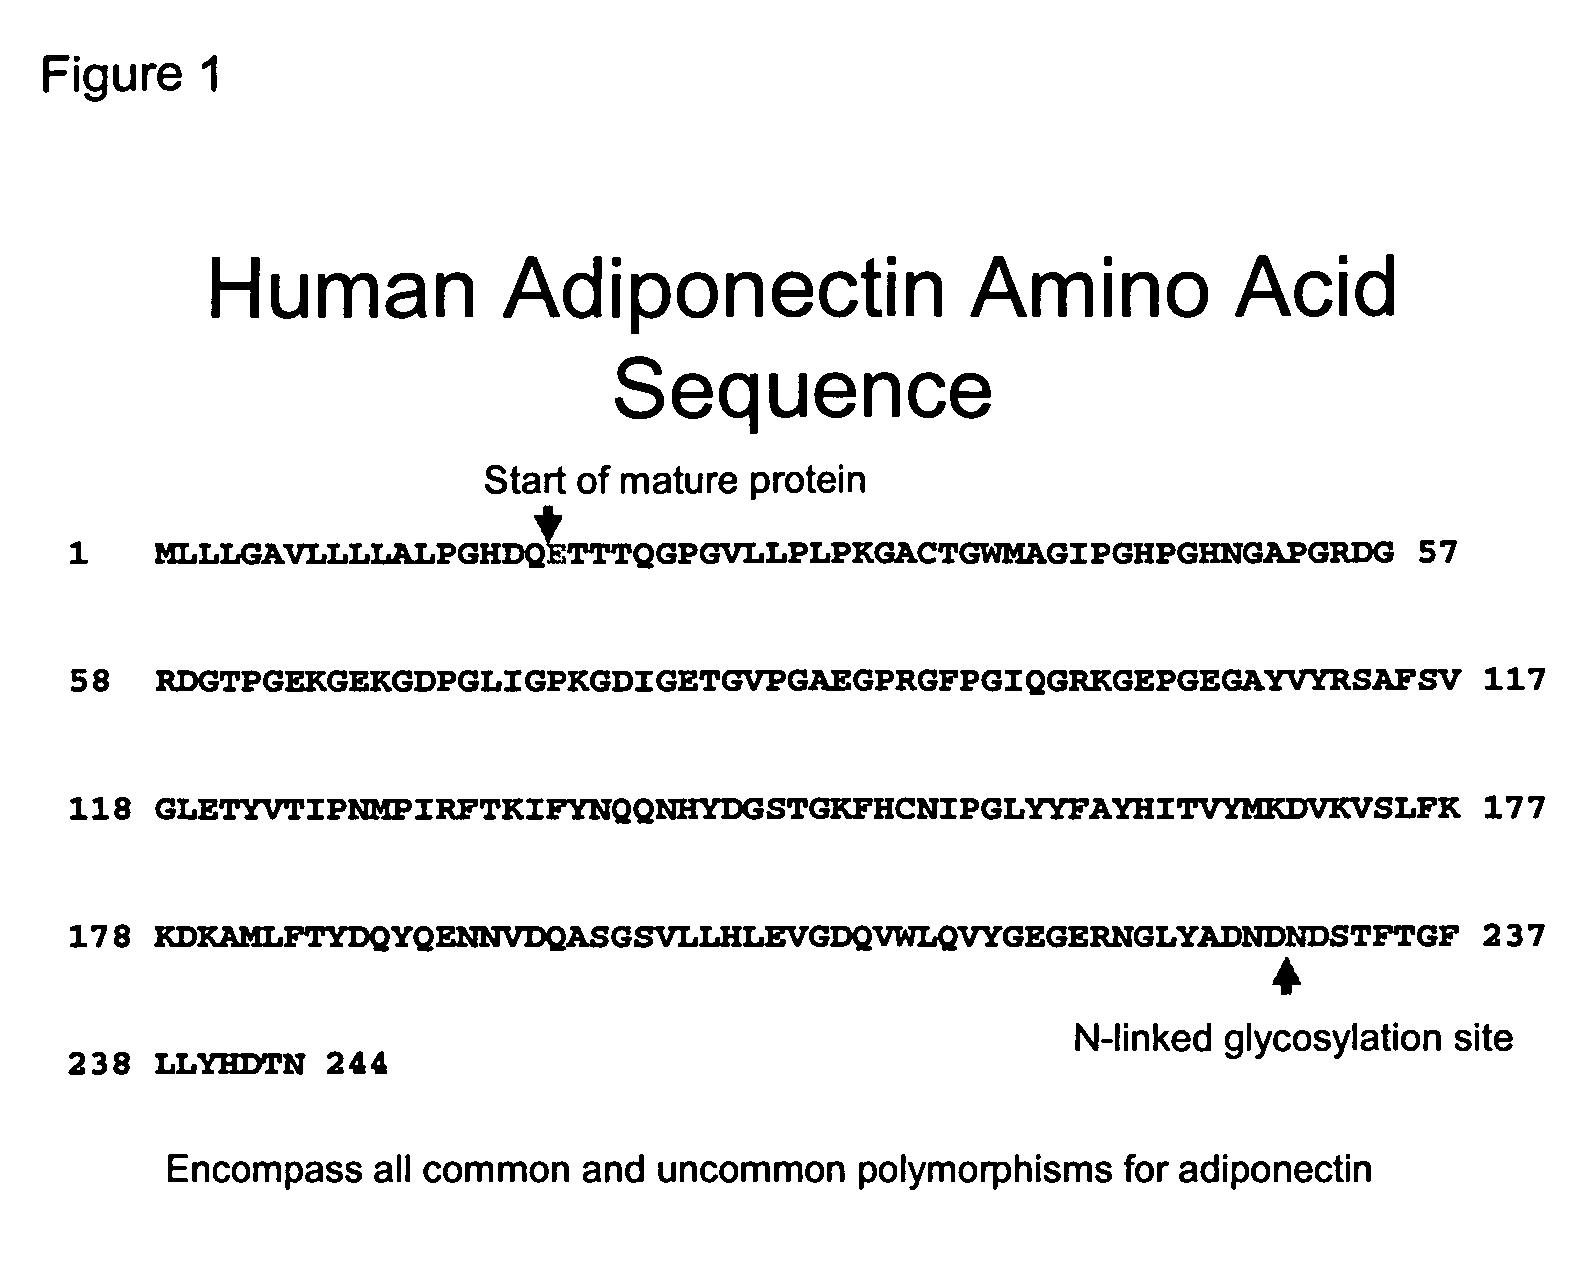 Characterization and identification of unique human adiponectin isoforms and antibodies